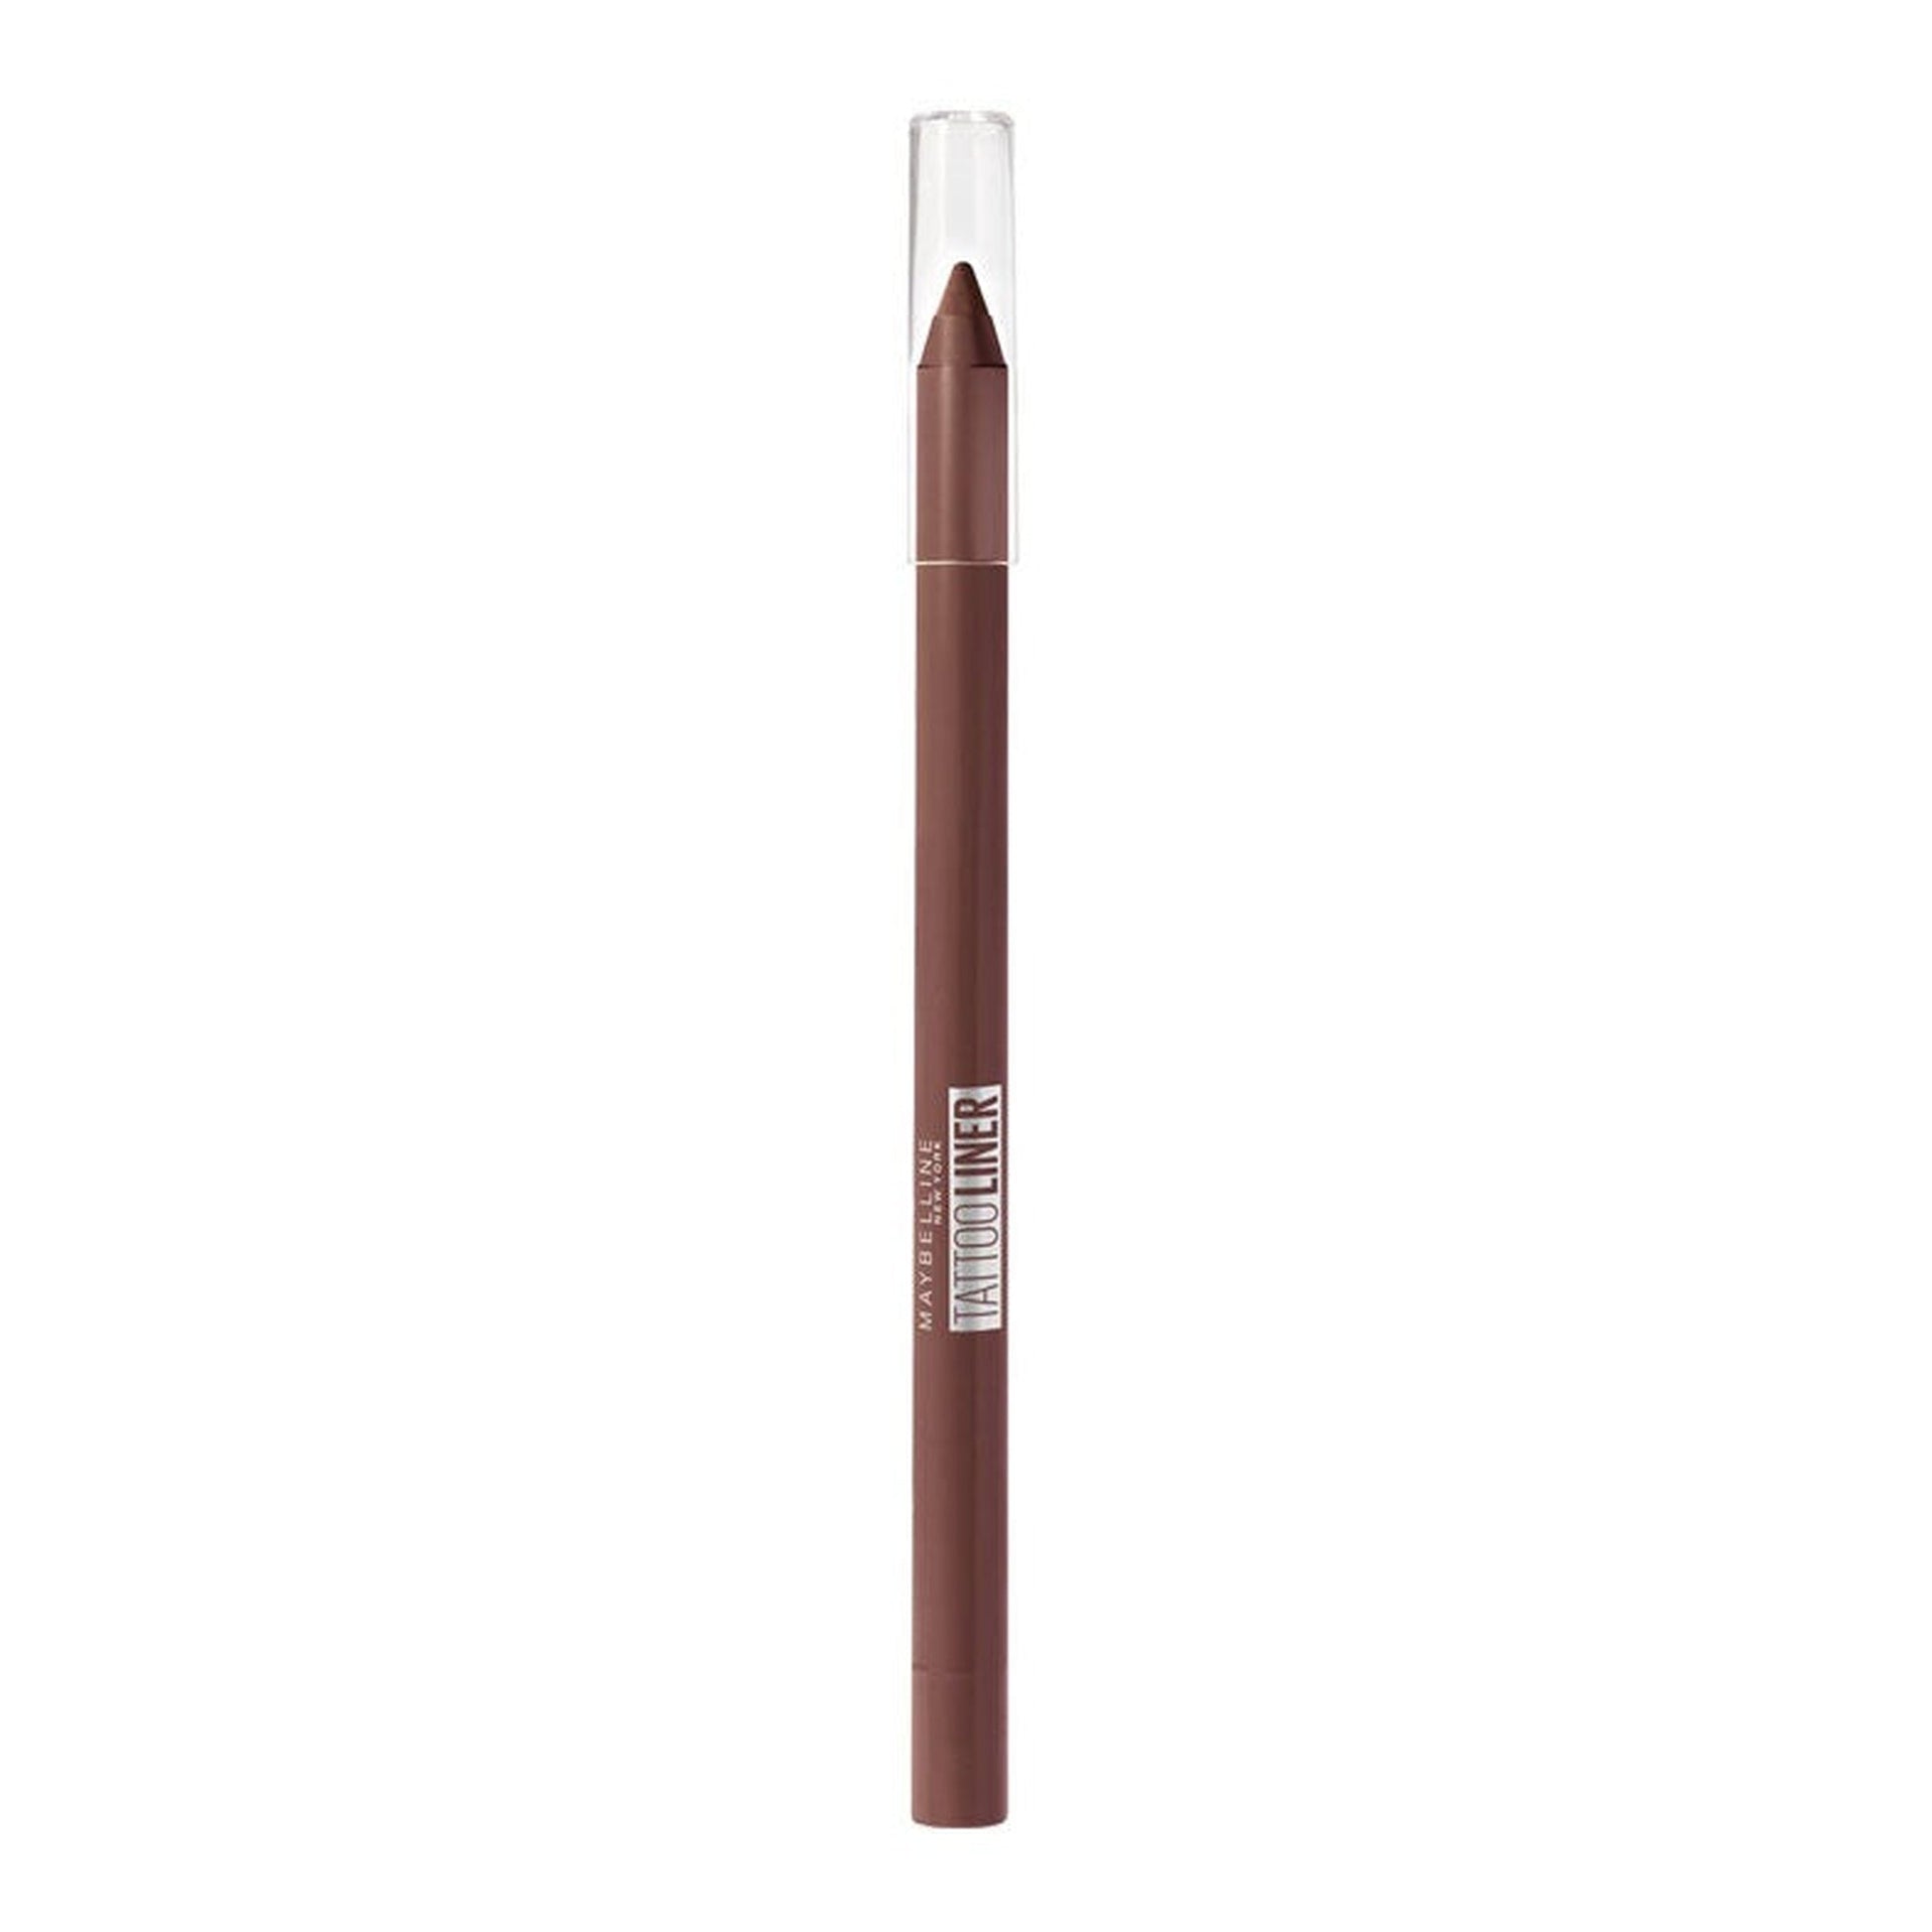 Maybelline Tattoo Liner Gel Pencil 911 Smooth Walnut-Maybelline-BeautyNmakeup.co.uk